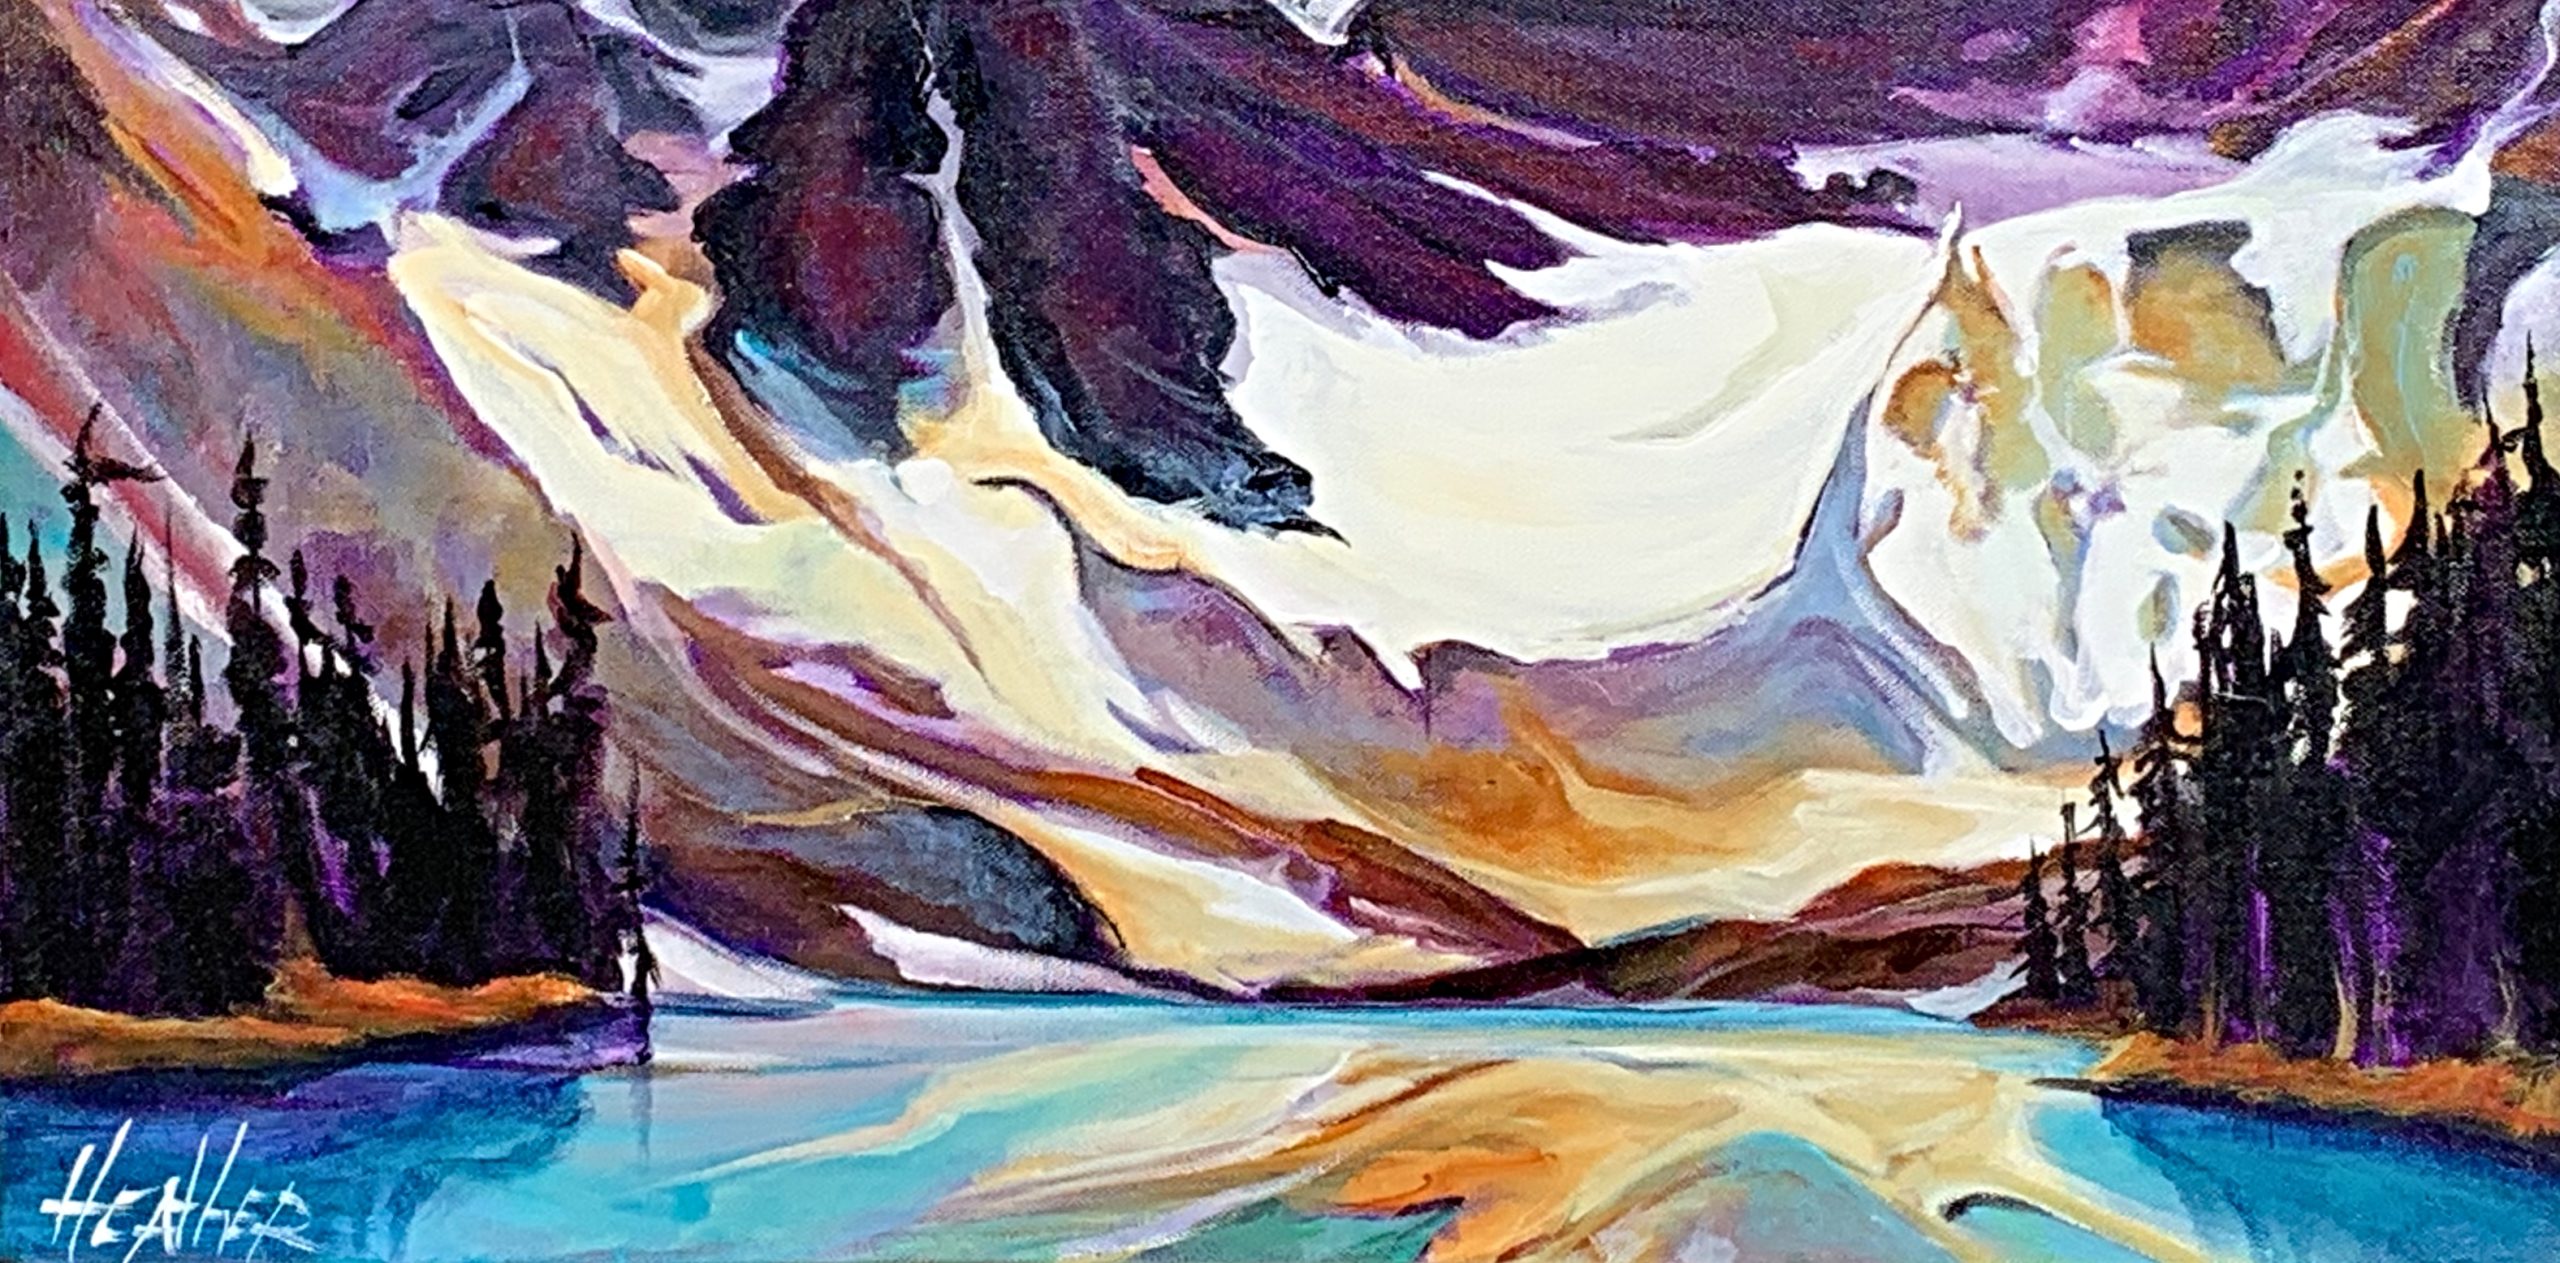 Magical Slopes like Musical Notes, acrylic landscape painting by Heather Pant | Effusion Art Gallery + Cast Glass Studio, Invermere BC